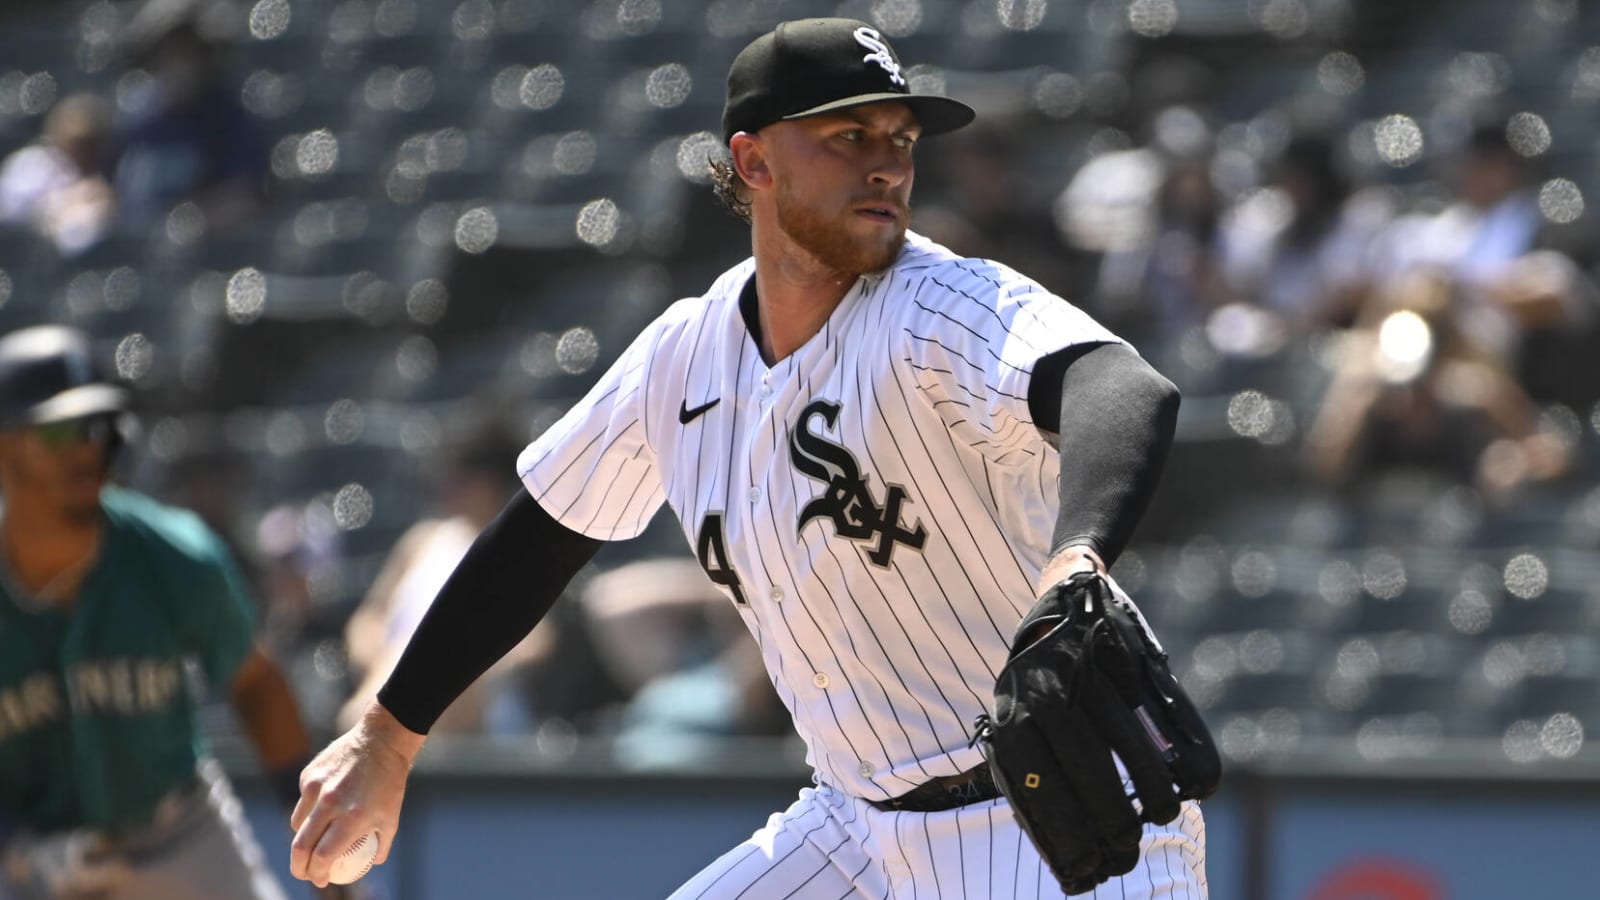 White Sox pitcher's rough season ends with minor surgery